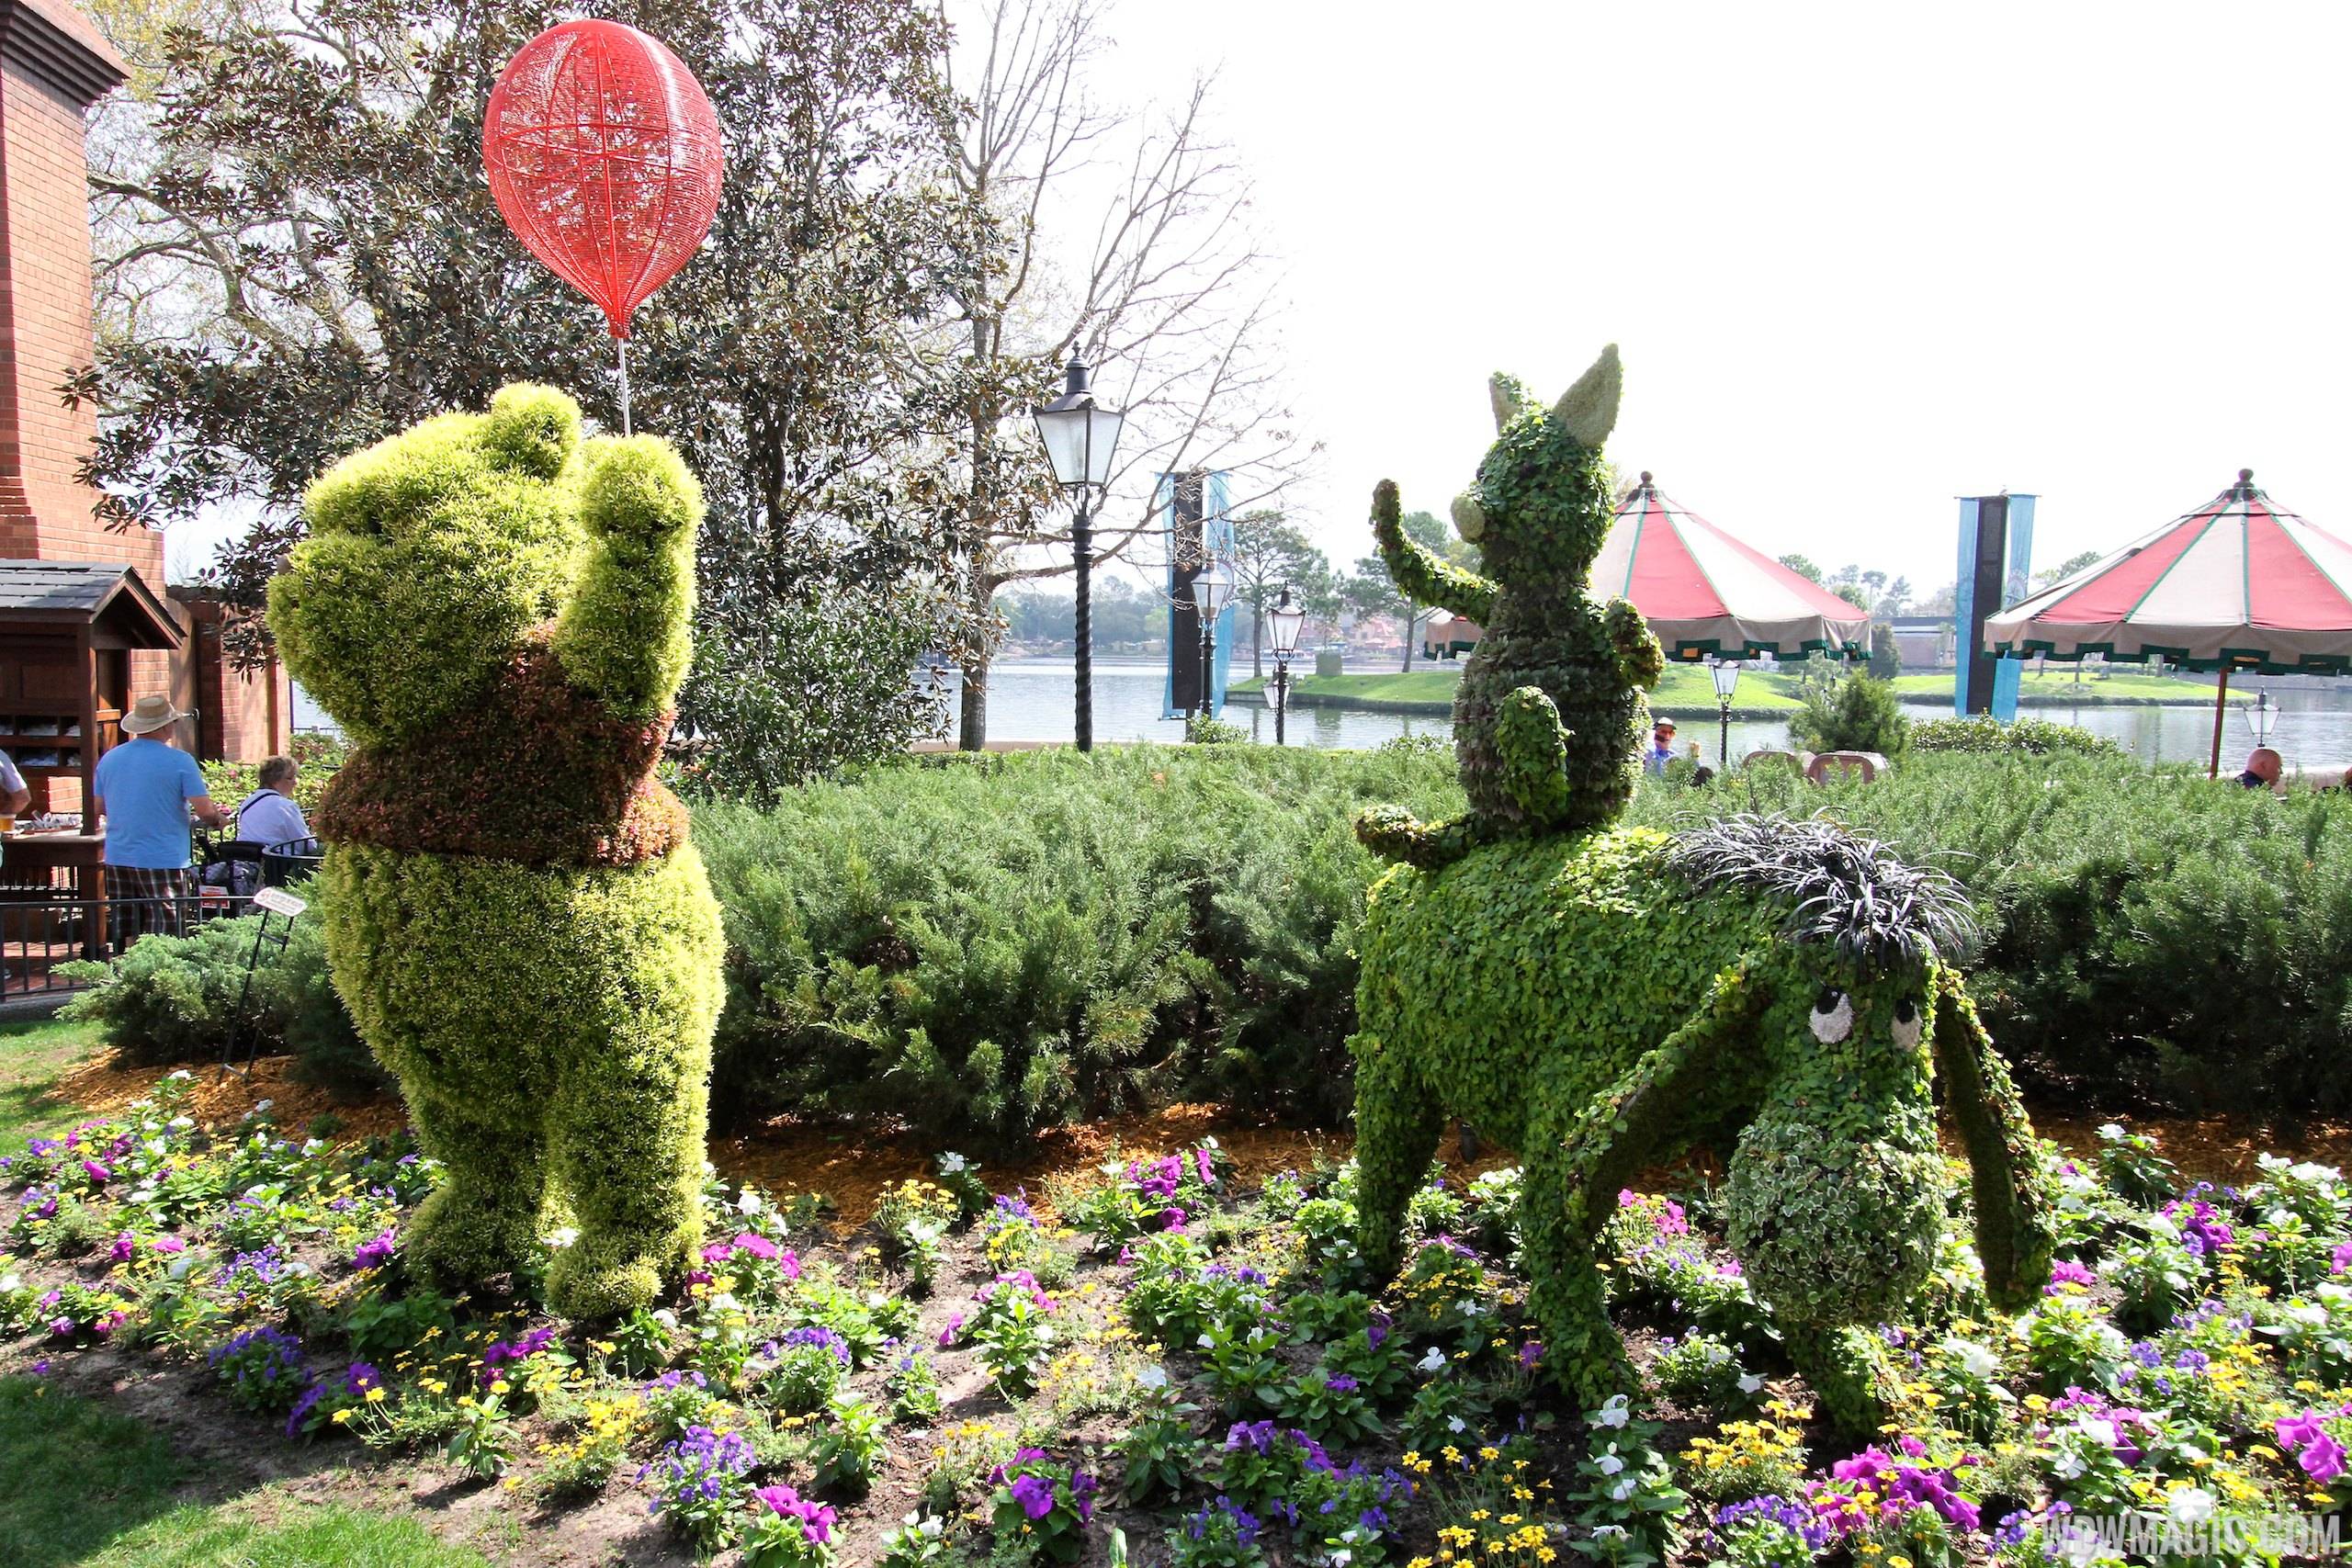 2014 Epcot Flower and Garden Festival - Winnie the Pooh topiary at the UK Pavilion